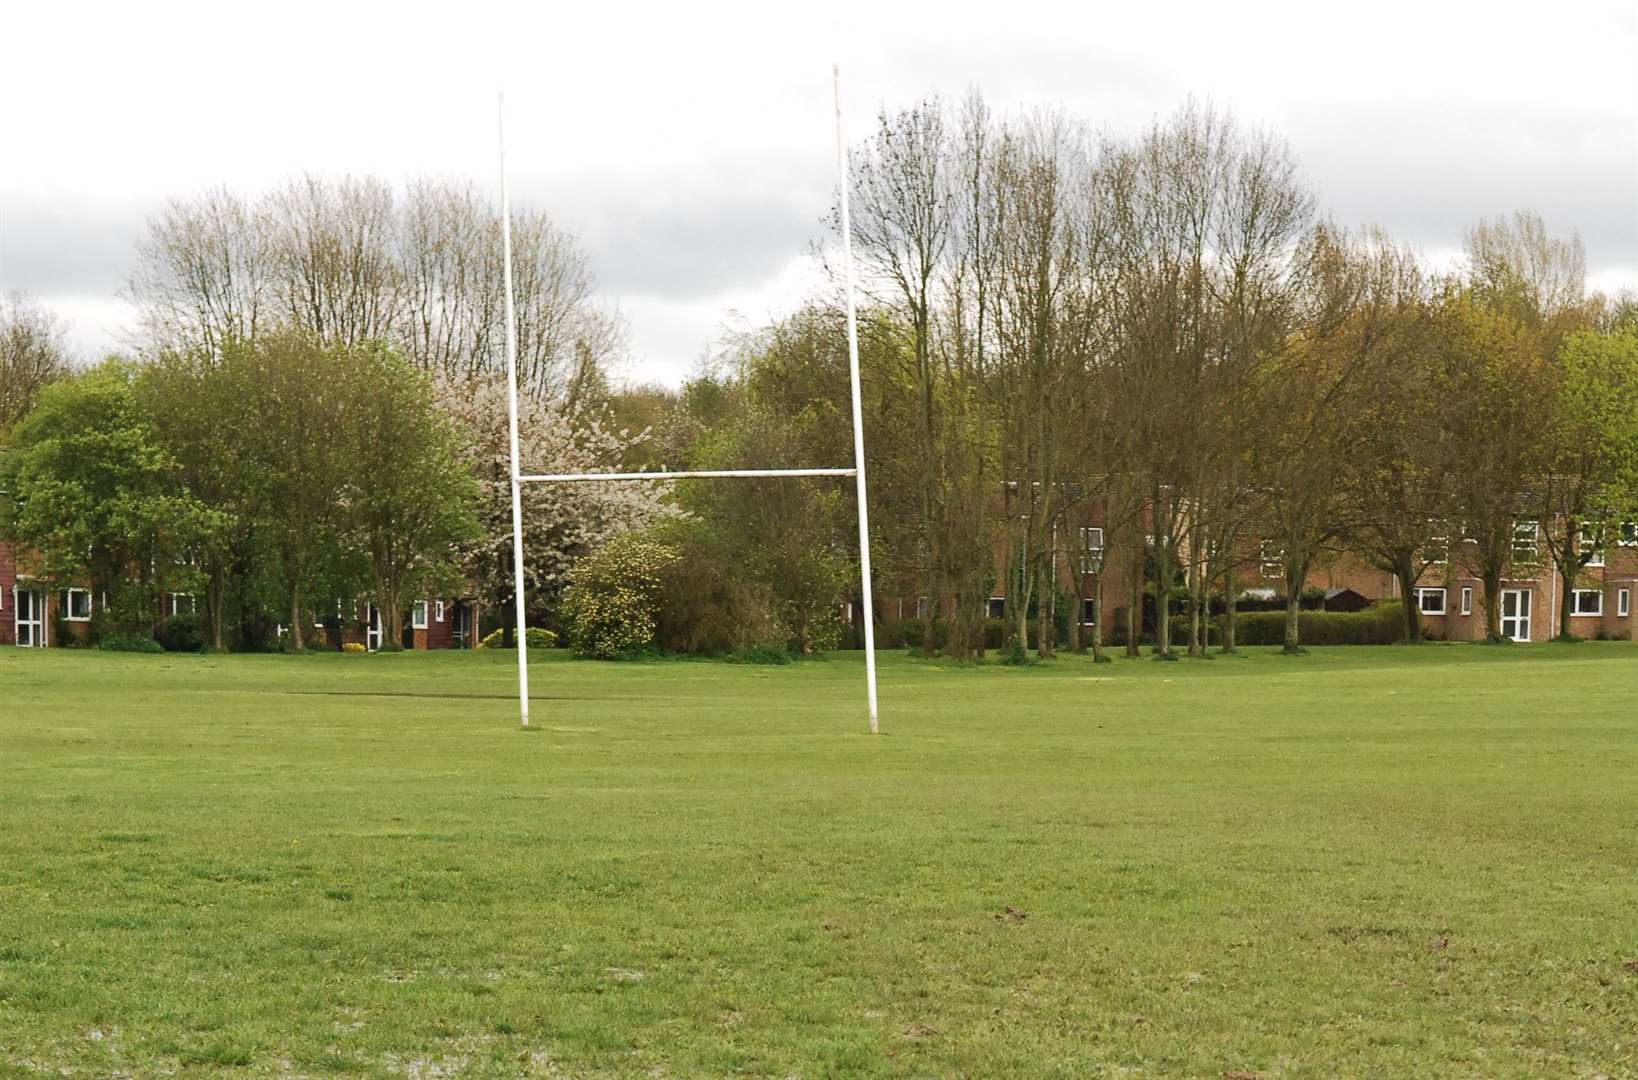 The fight broke out at New Ash Green sports pavilion field